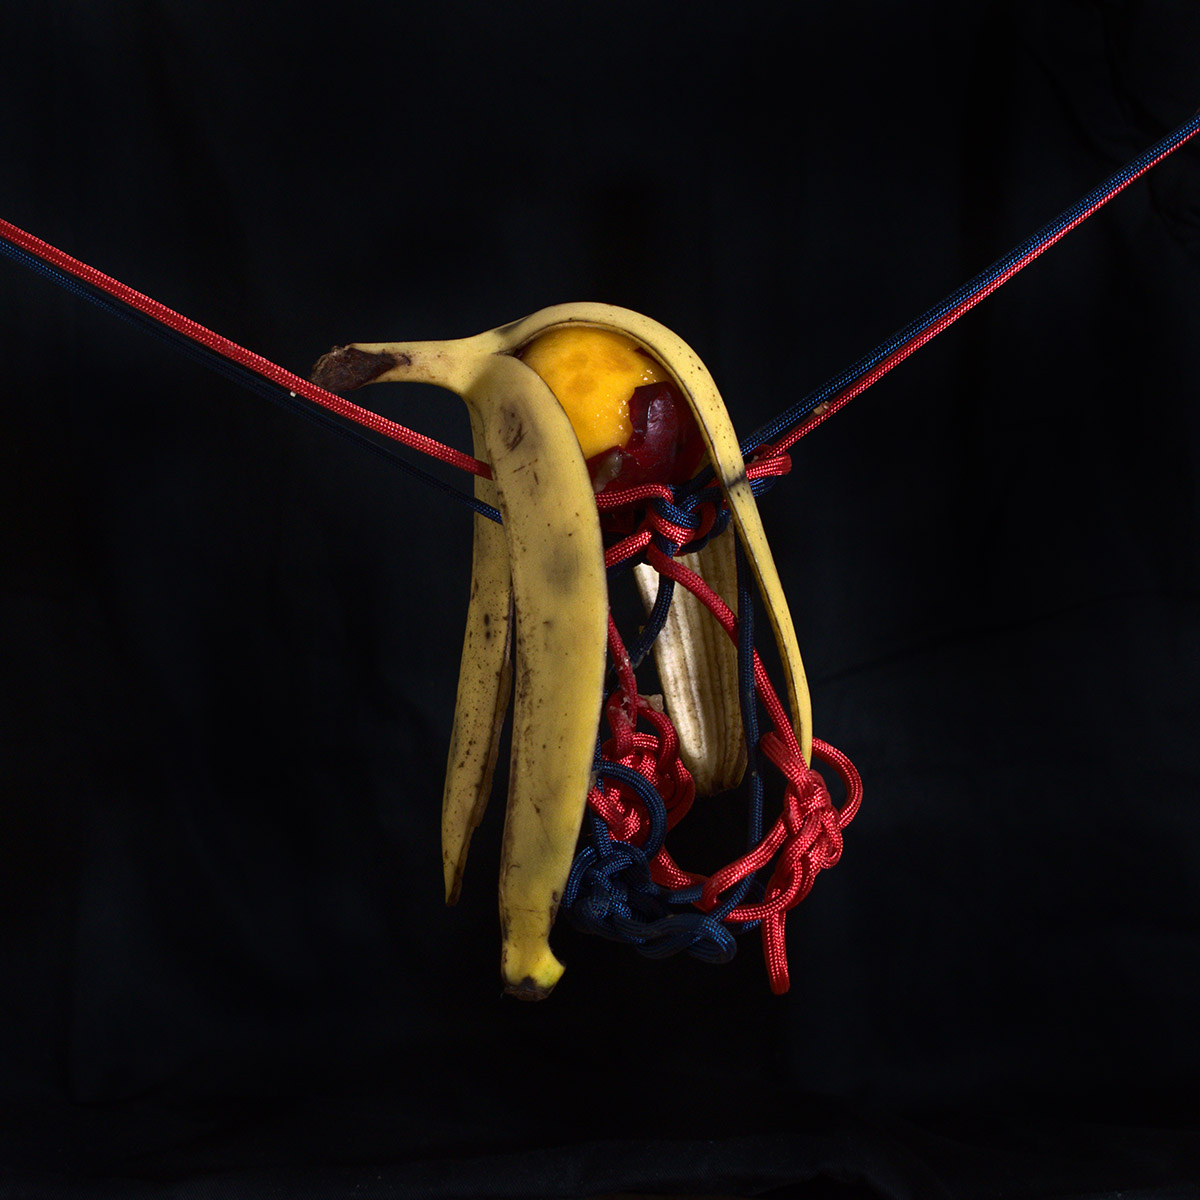 A partially peeled nectarine with a banana skin hanging over it, suspended by blue and red knotted rope in front of a black background.